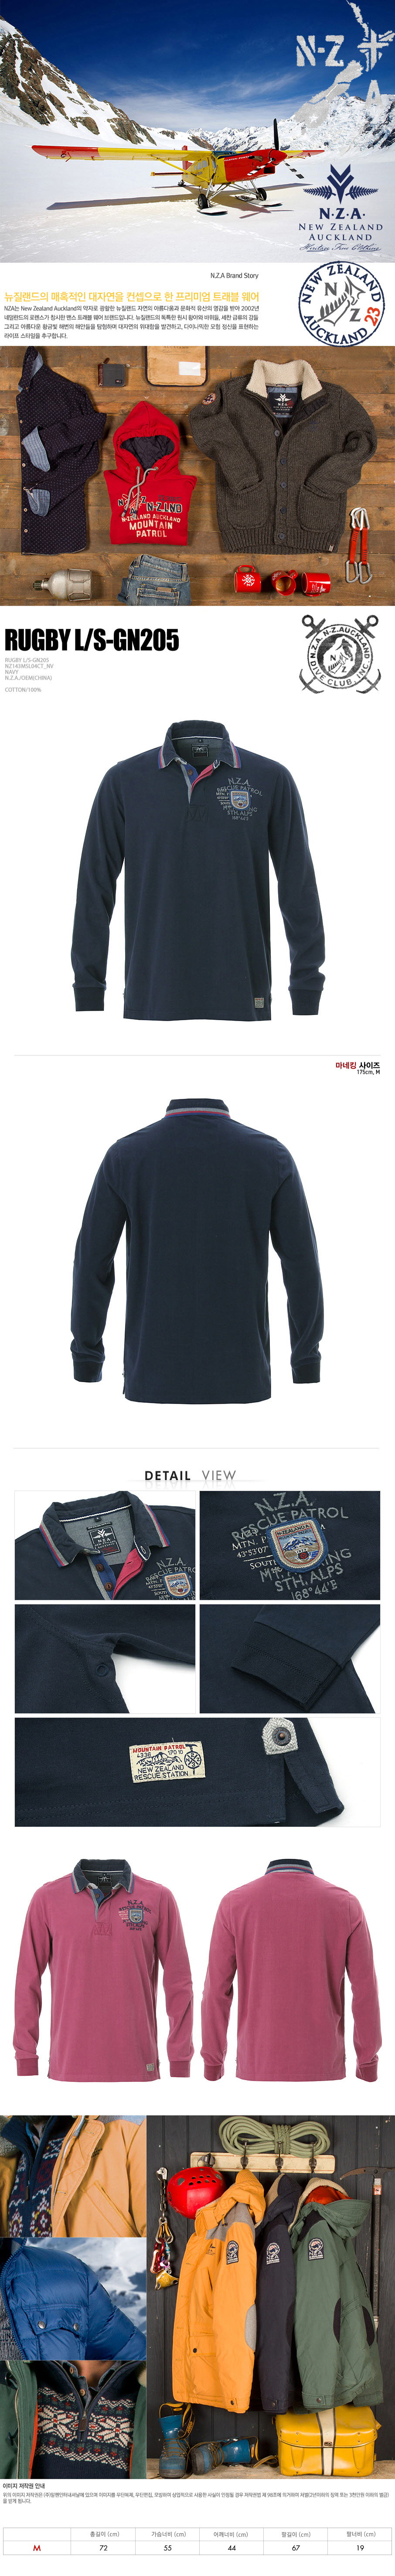 [N.Z.A] Rugby L/S-GN205 (14GN205C) - NAVY